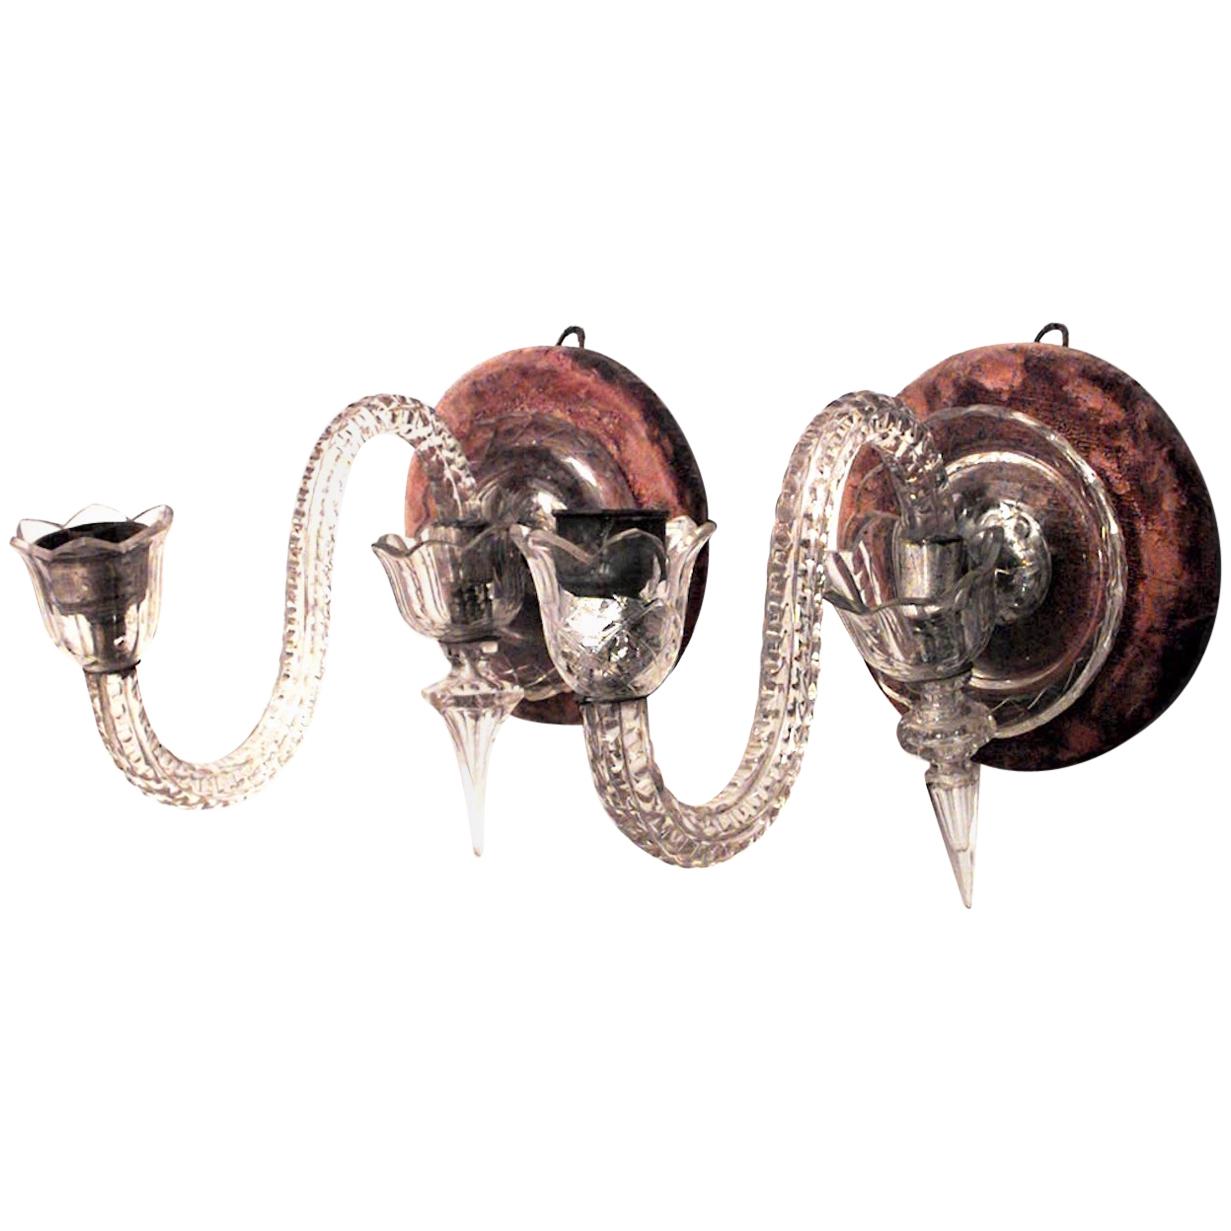 Pair of Similar English Victorian Waterford Crystal Wall Sconces